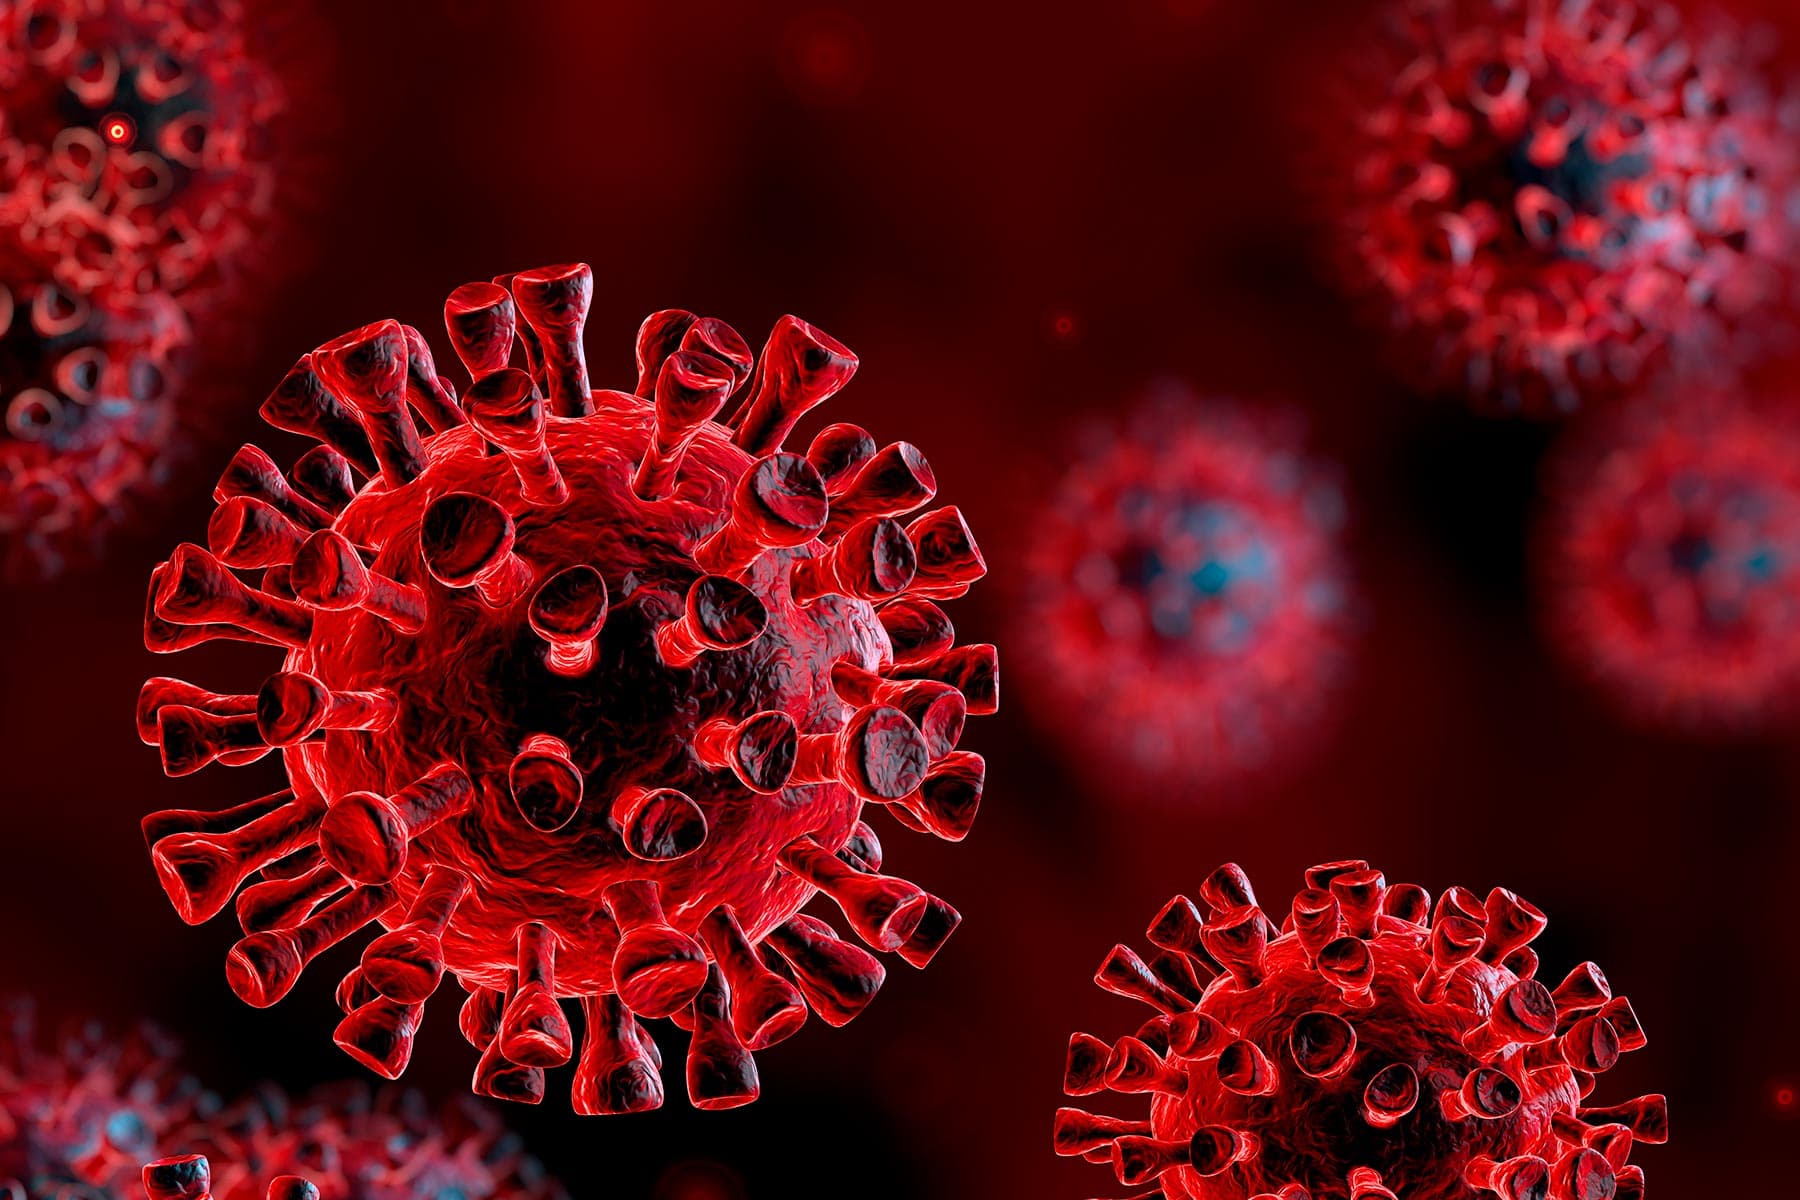 Delta Variant Comes Out On Top In COVID-19 Infections In Bulgaria